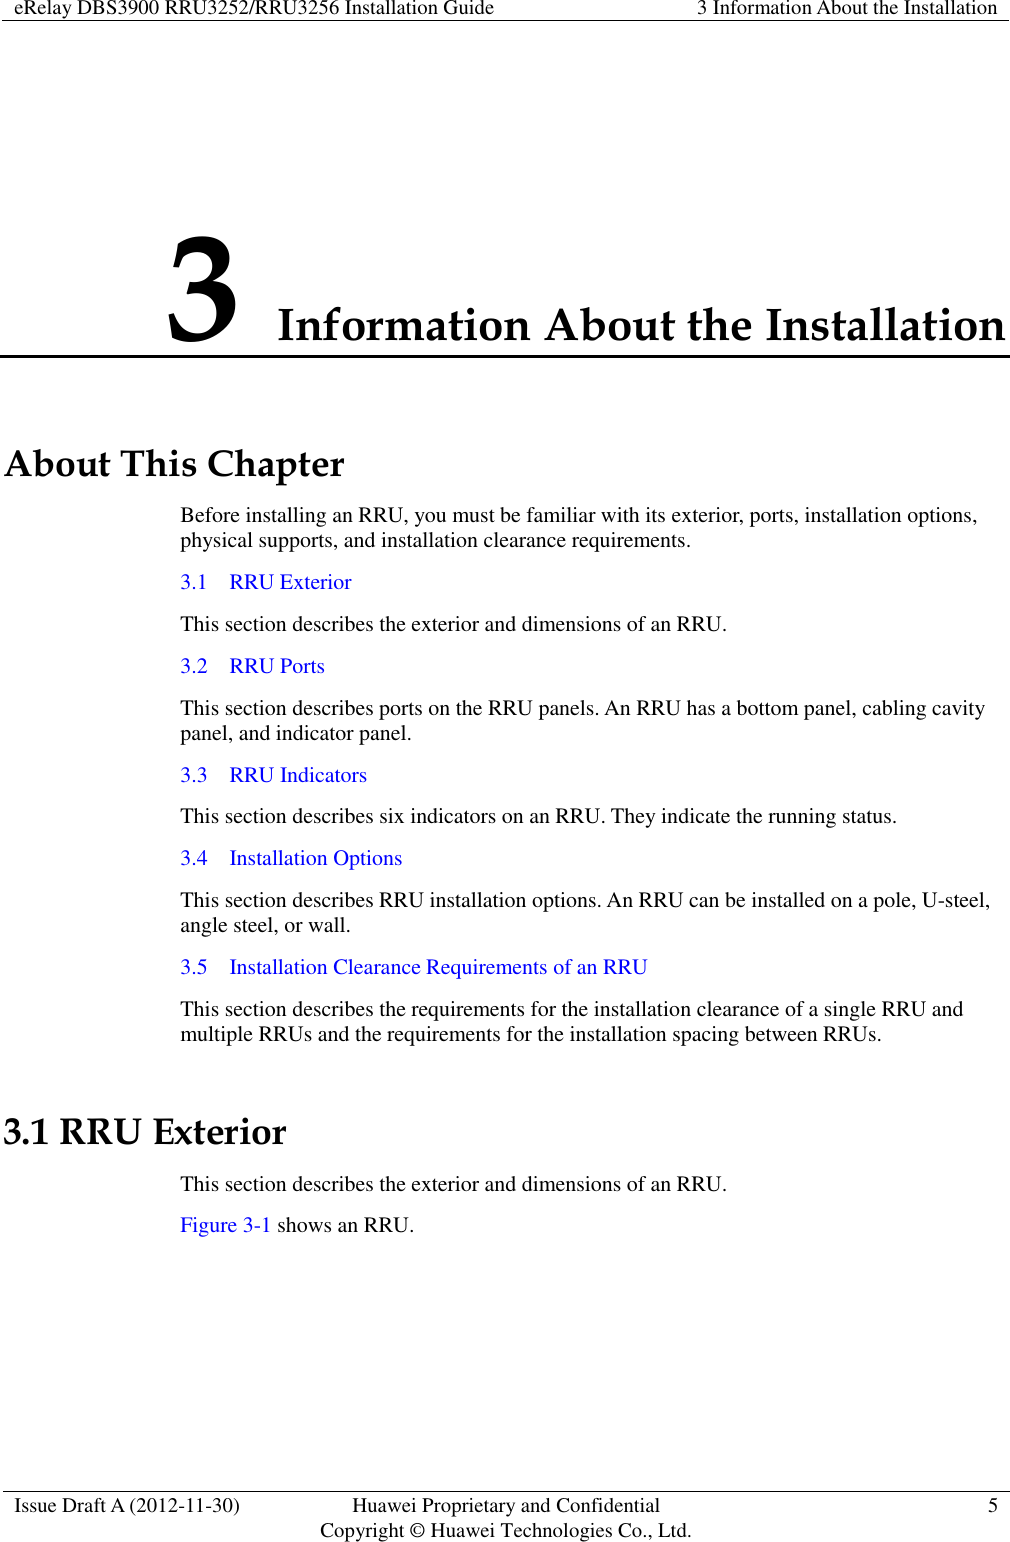 eRelay DBS3900 RRU3252/RRU3256 Installation Guide 3 Information About the Installation  Issue Draft A (2012-11-30) Huawei Proprietary and Confidential                                     Copyright © Huawei Technologies Co., Ltd. 5  3 Information About the Installation About This Chapter Before installing an RRU, you must be familiar with its exterior, ports, installation options, physical supports, and installation clearance requirements. 3.1    RRU Exterior This section describes the exterior and dimensions of an RRU. 3.2    RRU Ports This section describes ports on the RRU panels. An RRU has a bottom panel, cabling cavity panel, and indicator panel. 3.3    RRU Indicators This section describes six indicators on an RRU. They indicate the running status.   3.4    Installation Options This section describes RRU installation options. An RRU can be installed on a pole, U-steel, angle steel, or wall. 3.5    Installation Clearance Requirements of an RRU This section describes the requirements for the installation clearance of a single RRU and multiple RRUs and the requirements for the installation spacing between RRUs. 3.1 RRU Exterior This section describes the exterior and dimensions of an RRU. Figure 3-1 shows an RRU.   